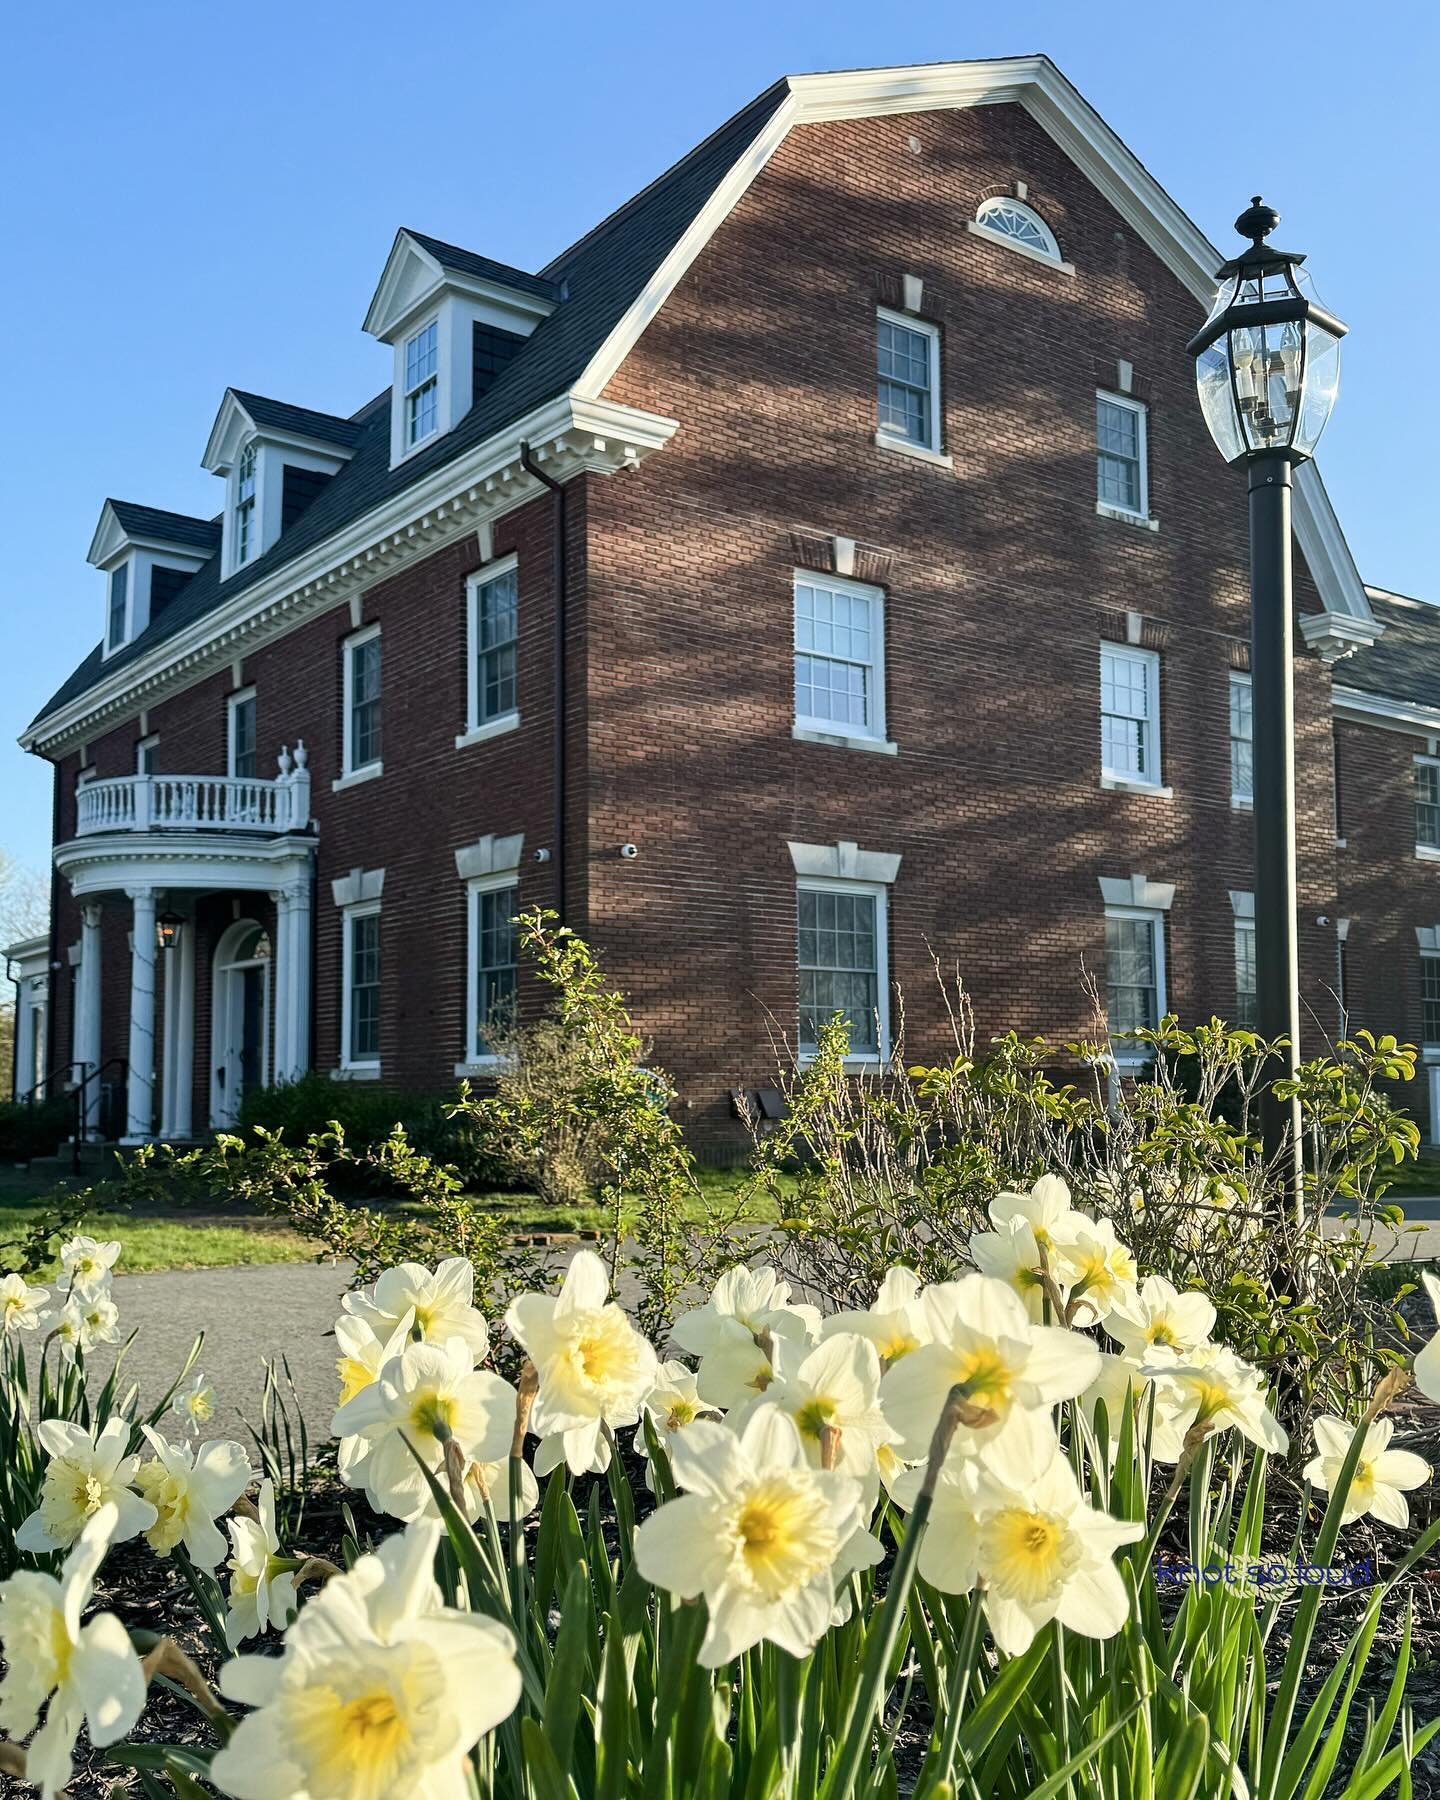 Spring has sprung at @innatoceanavenue 🌼 A historical bed &amp; breakfast located in New London just minutes from Ocean Beach Park. Tomorrow I will be sharing more about my recent stay. Stay tuned! 🗝️